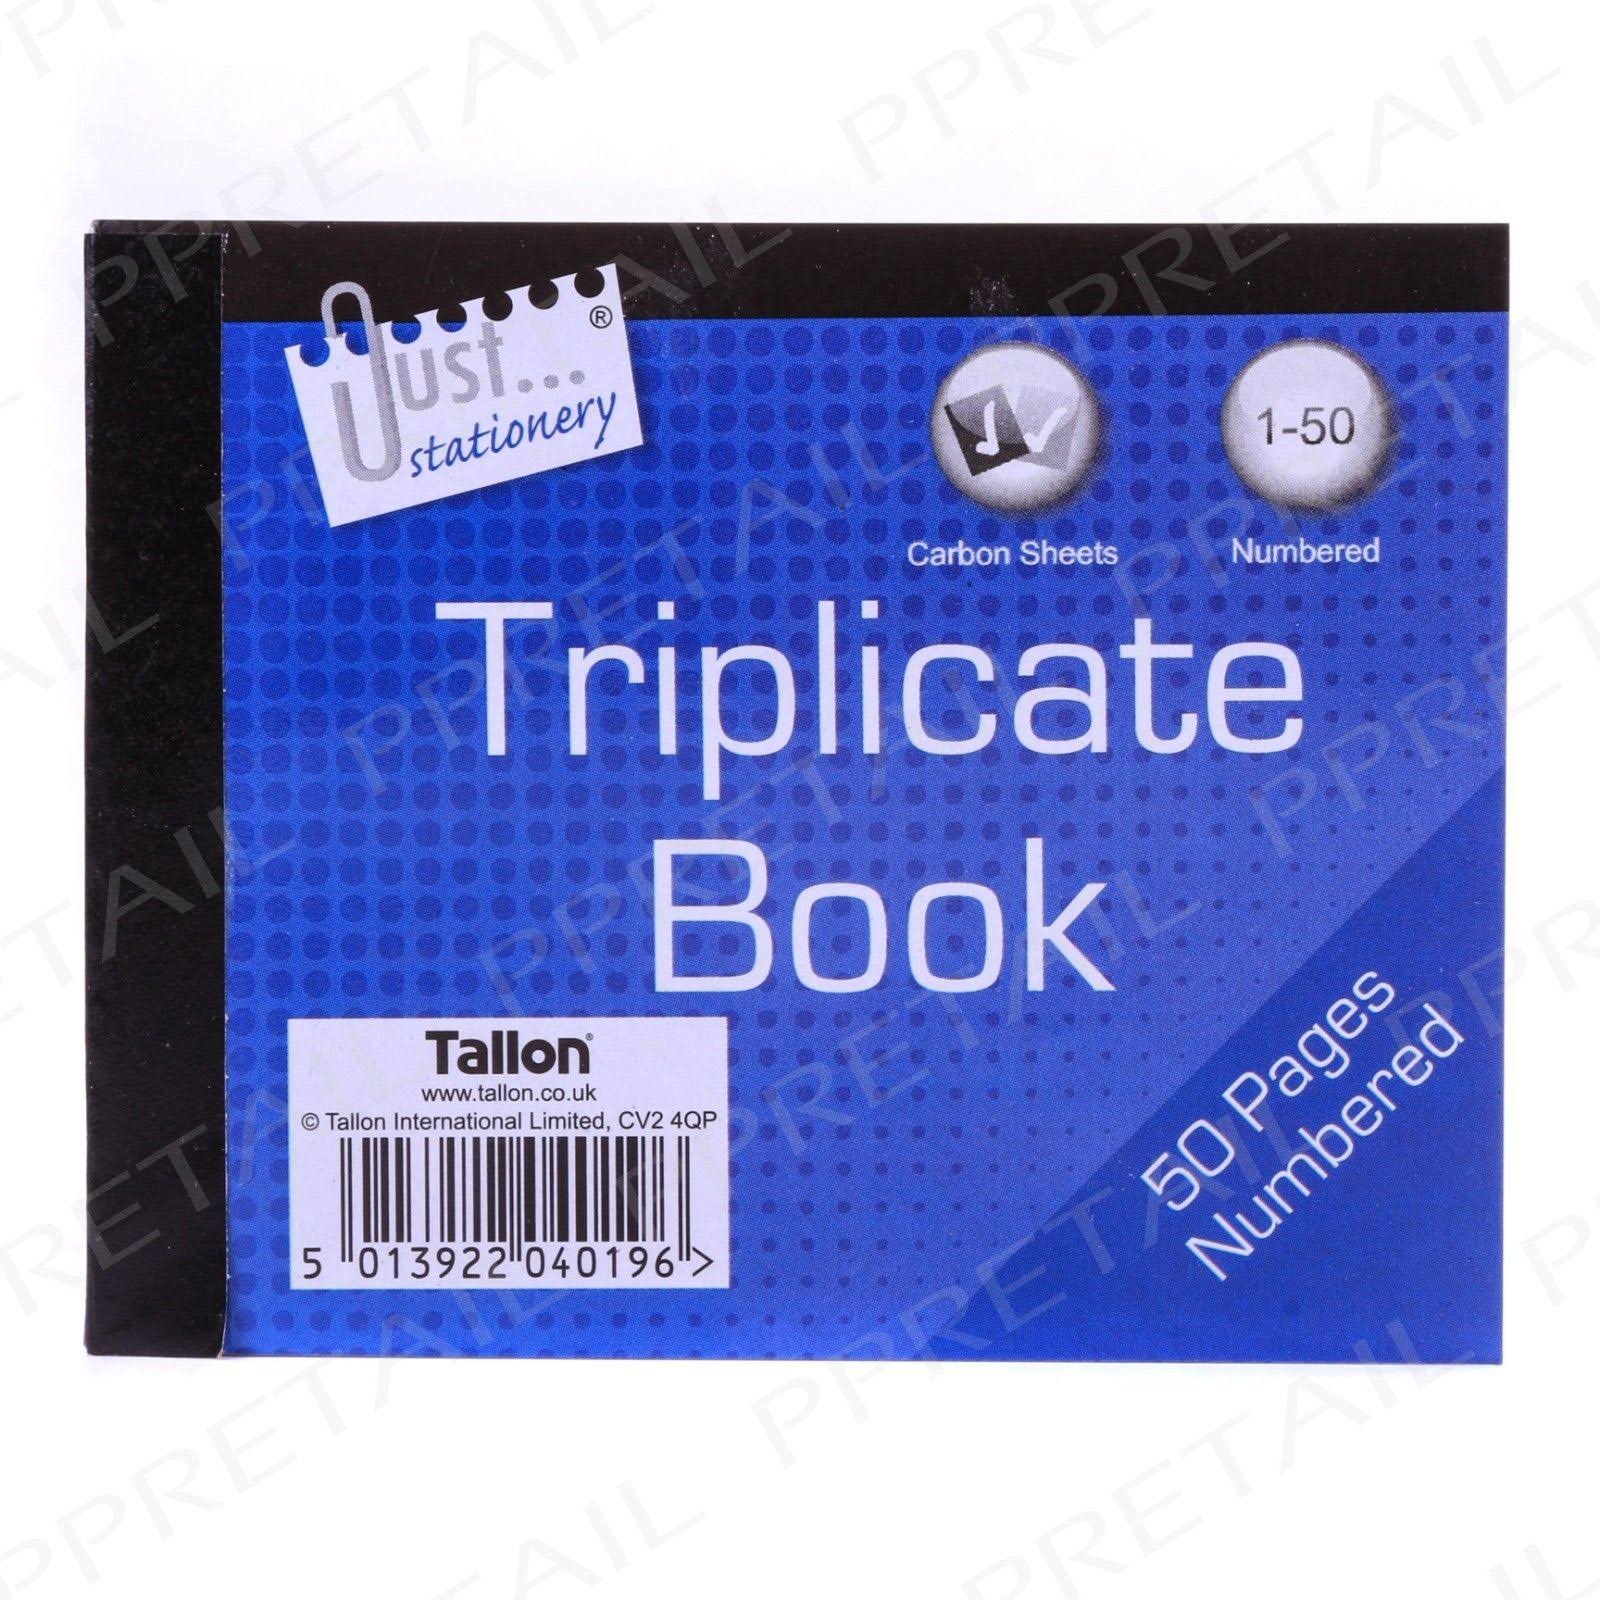 Just Stationery Triplicate Book - 50 Pages Numbered